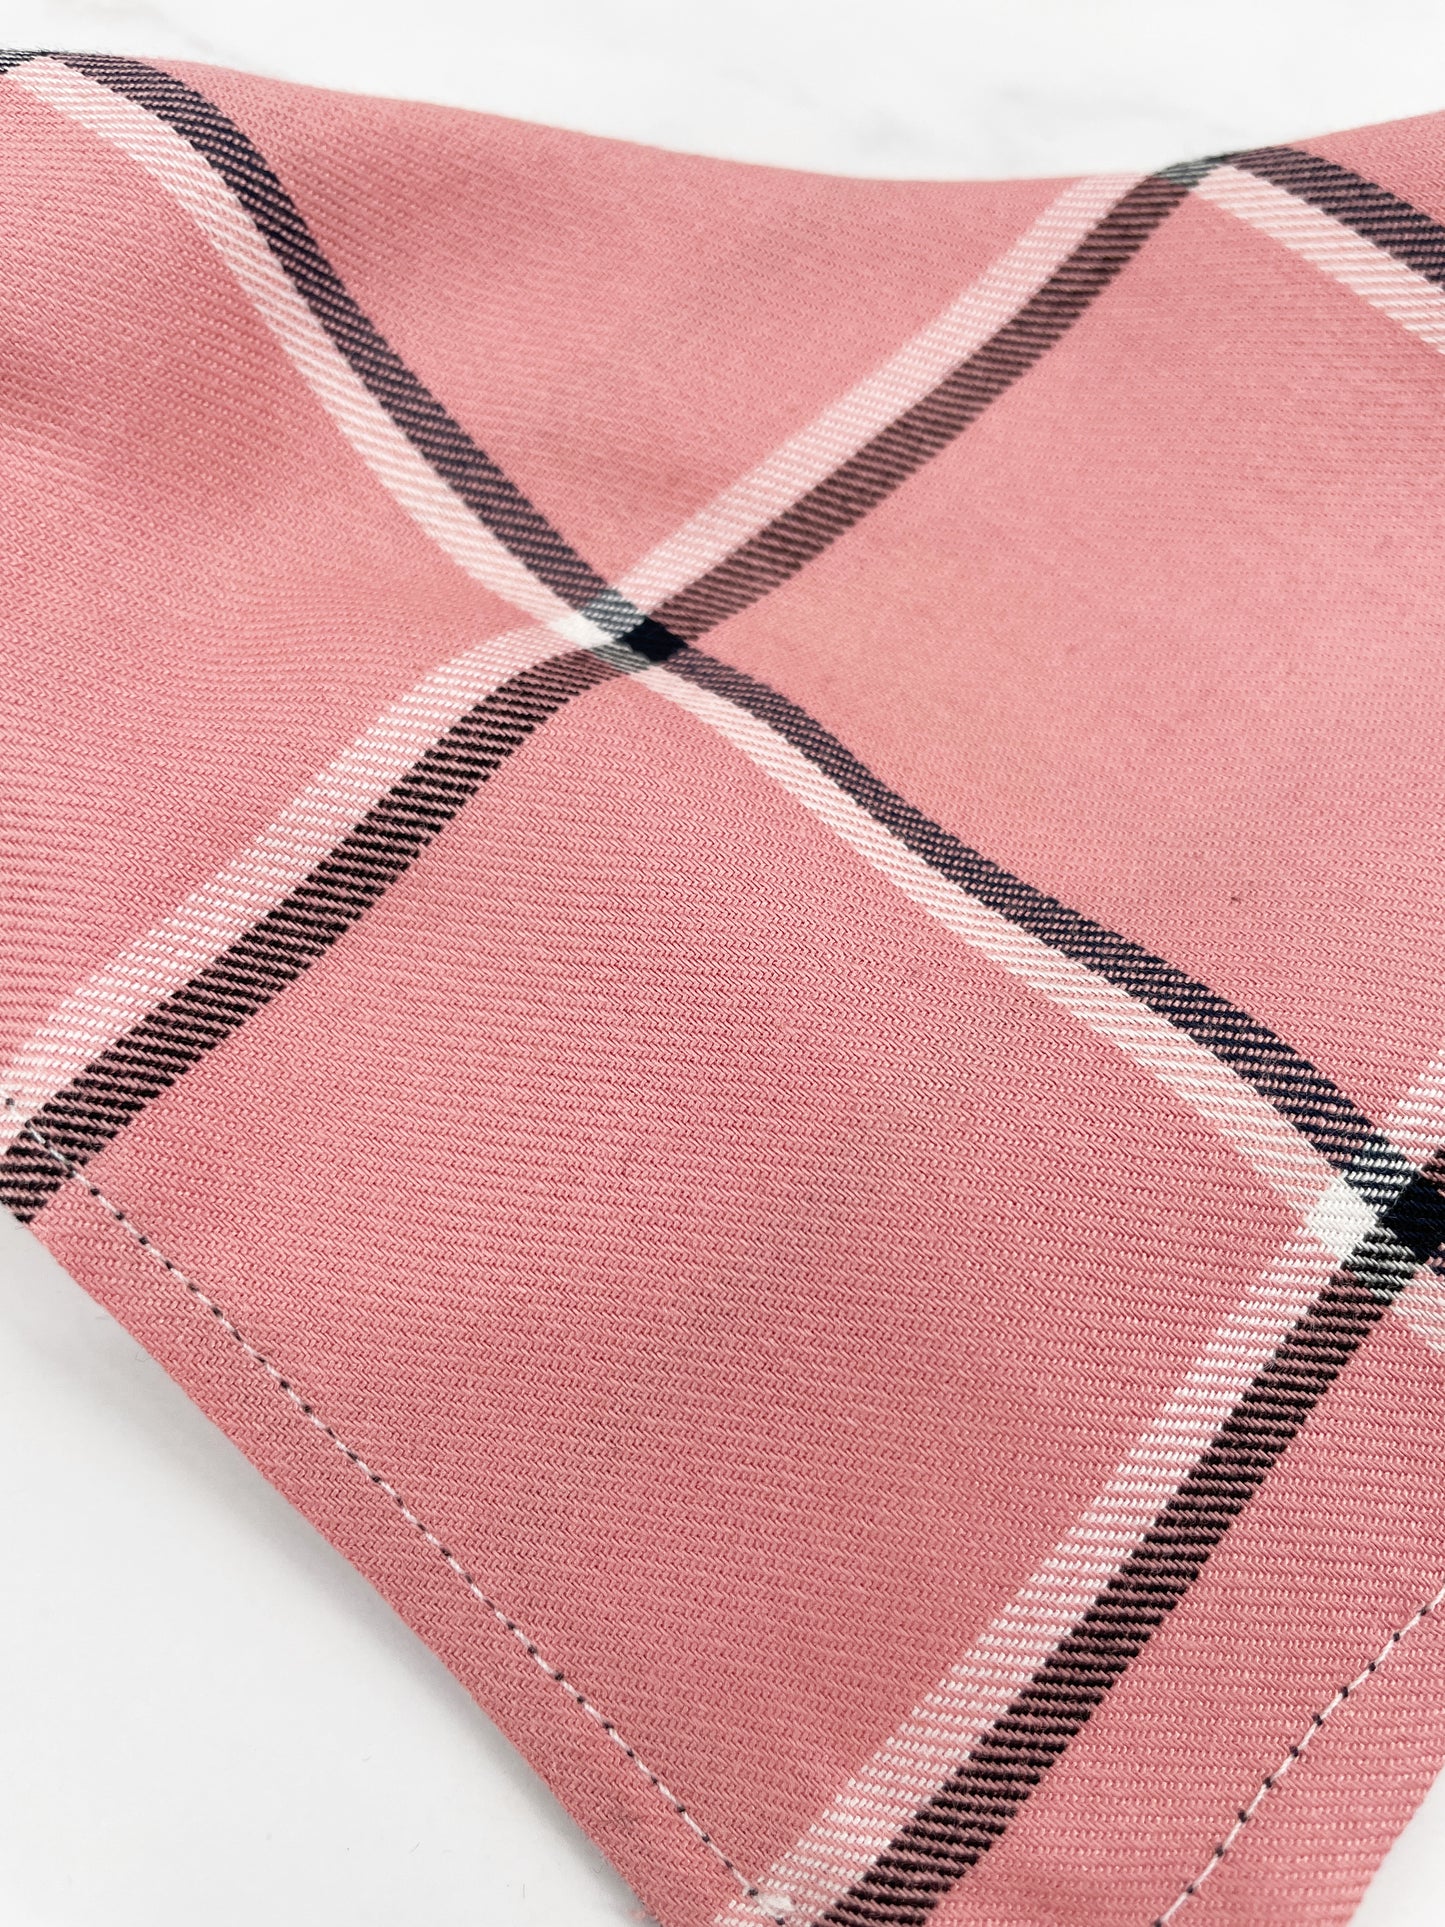 close up of the soft cotton fabric of the light pink dog bandana with white and black plaid stripes